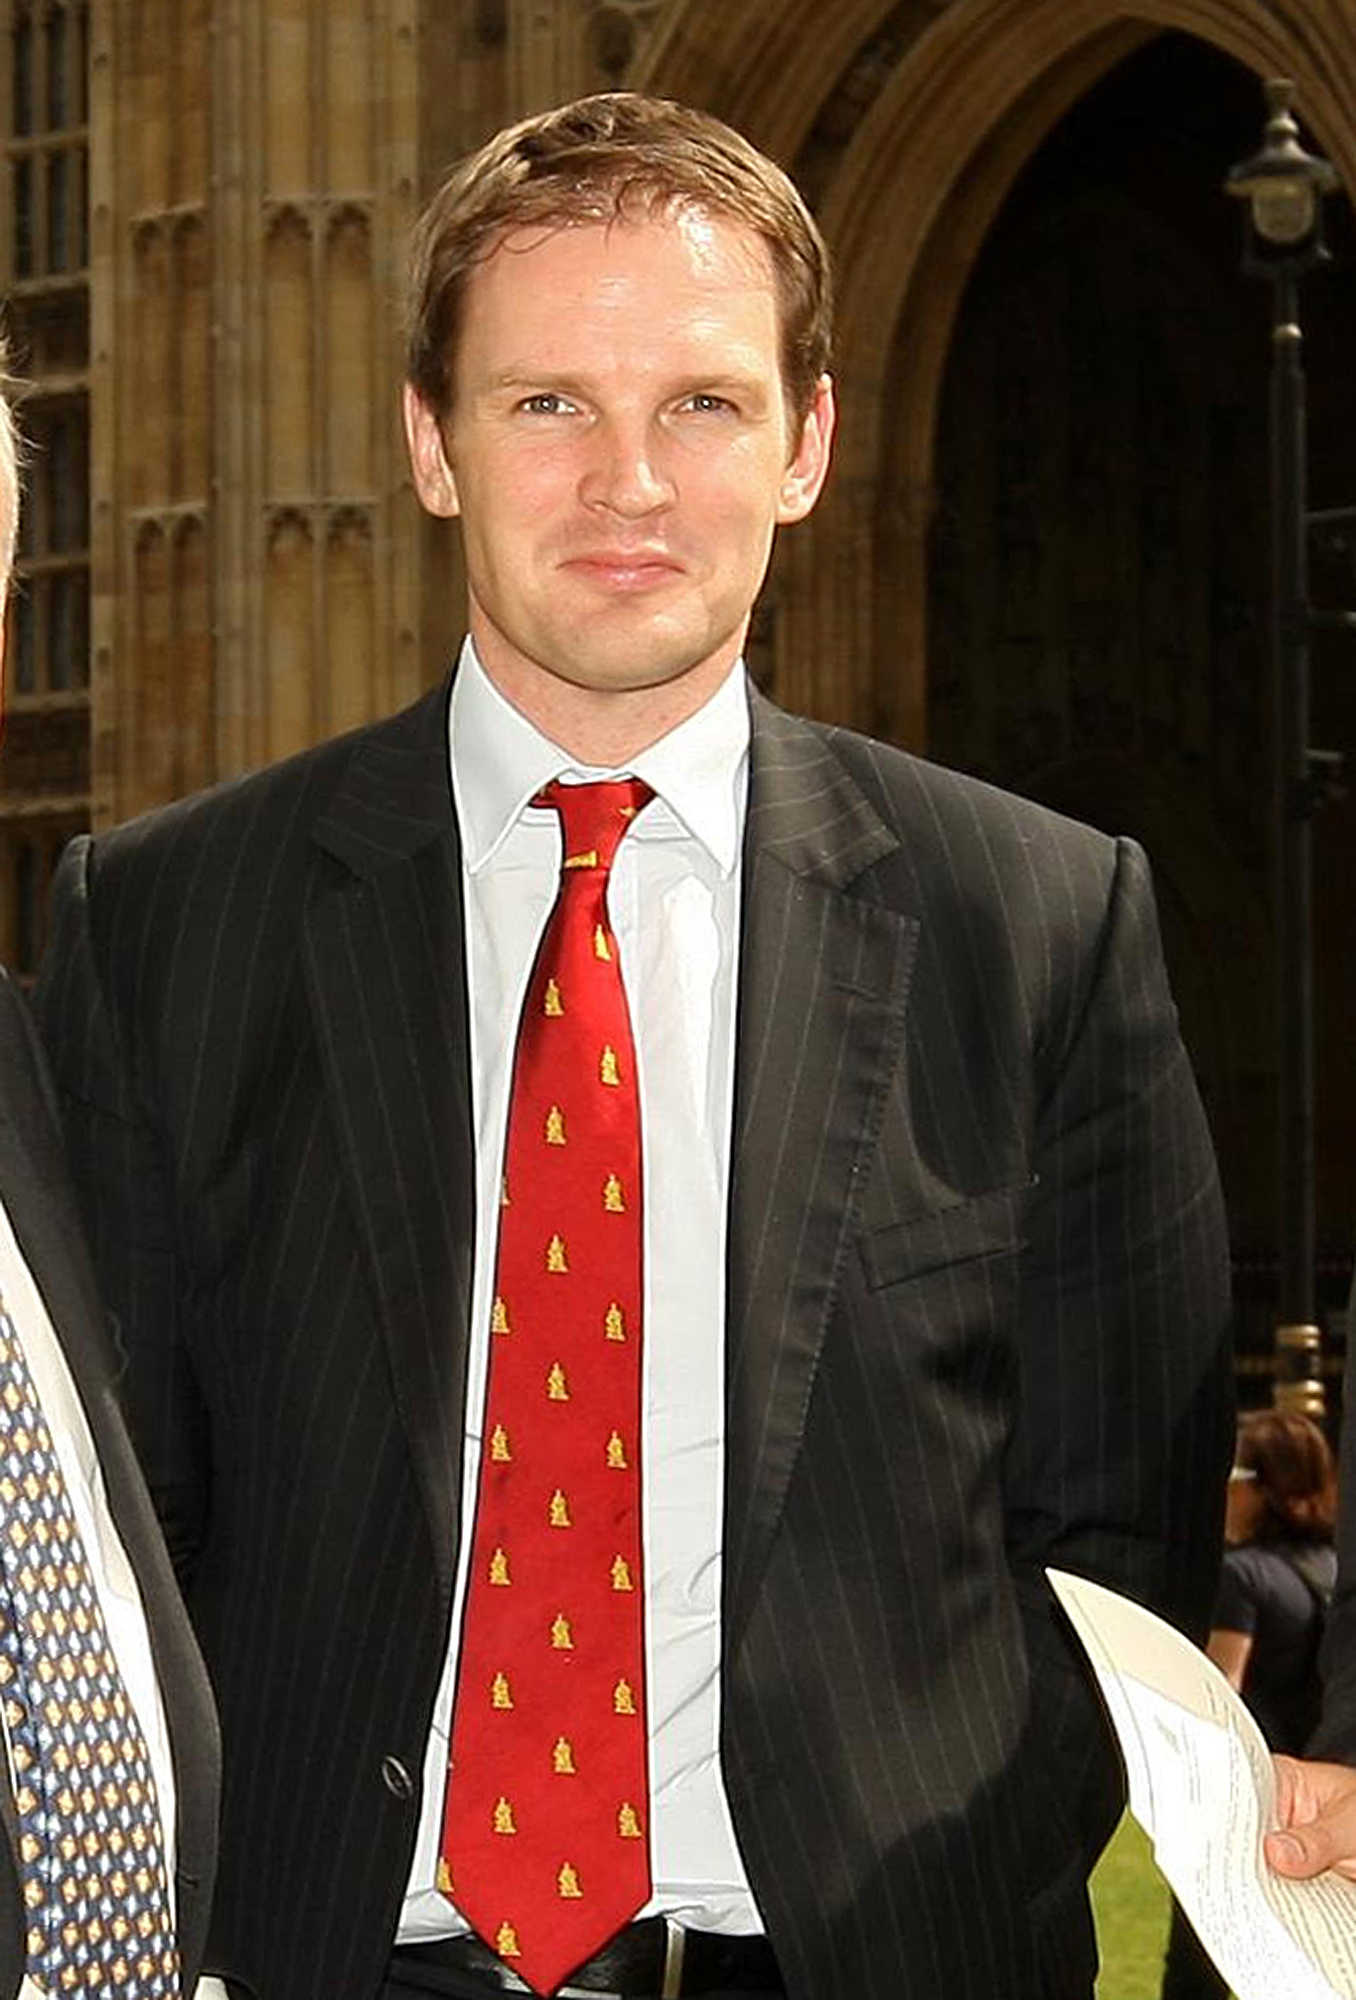 Conservative MP and former health minister Dr Dan Poulter has defected to Labour